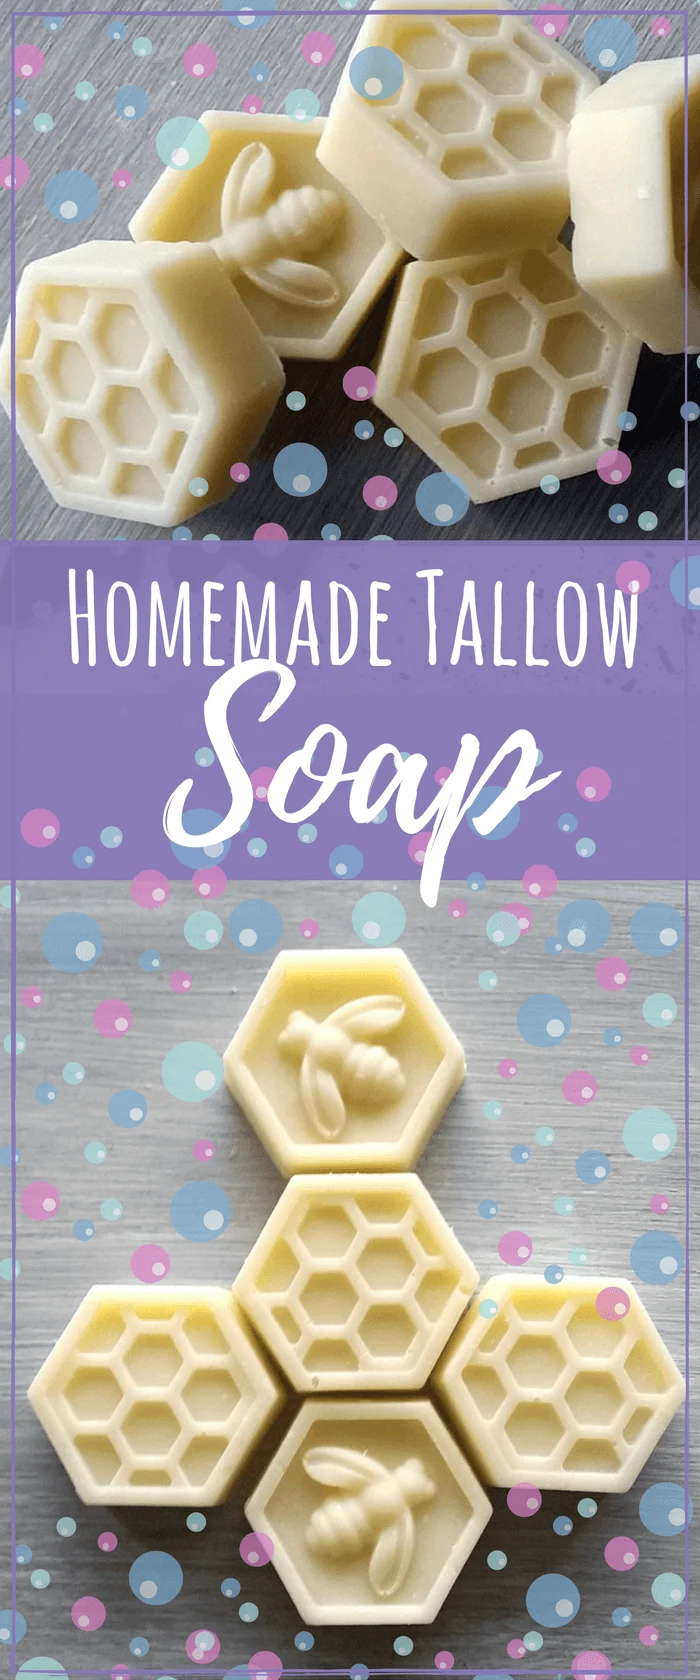 This homemade tallow soap recipe will help moisturize your skin very well since tallow is similar to our own skin properties. #soapmaking #soaprecipes #skincarerecipes #skincare